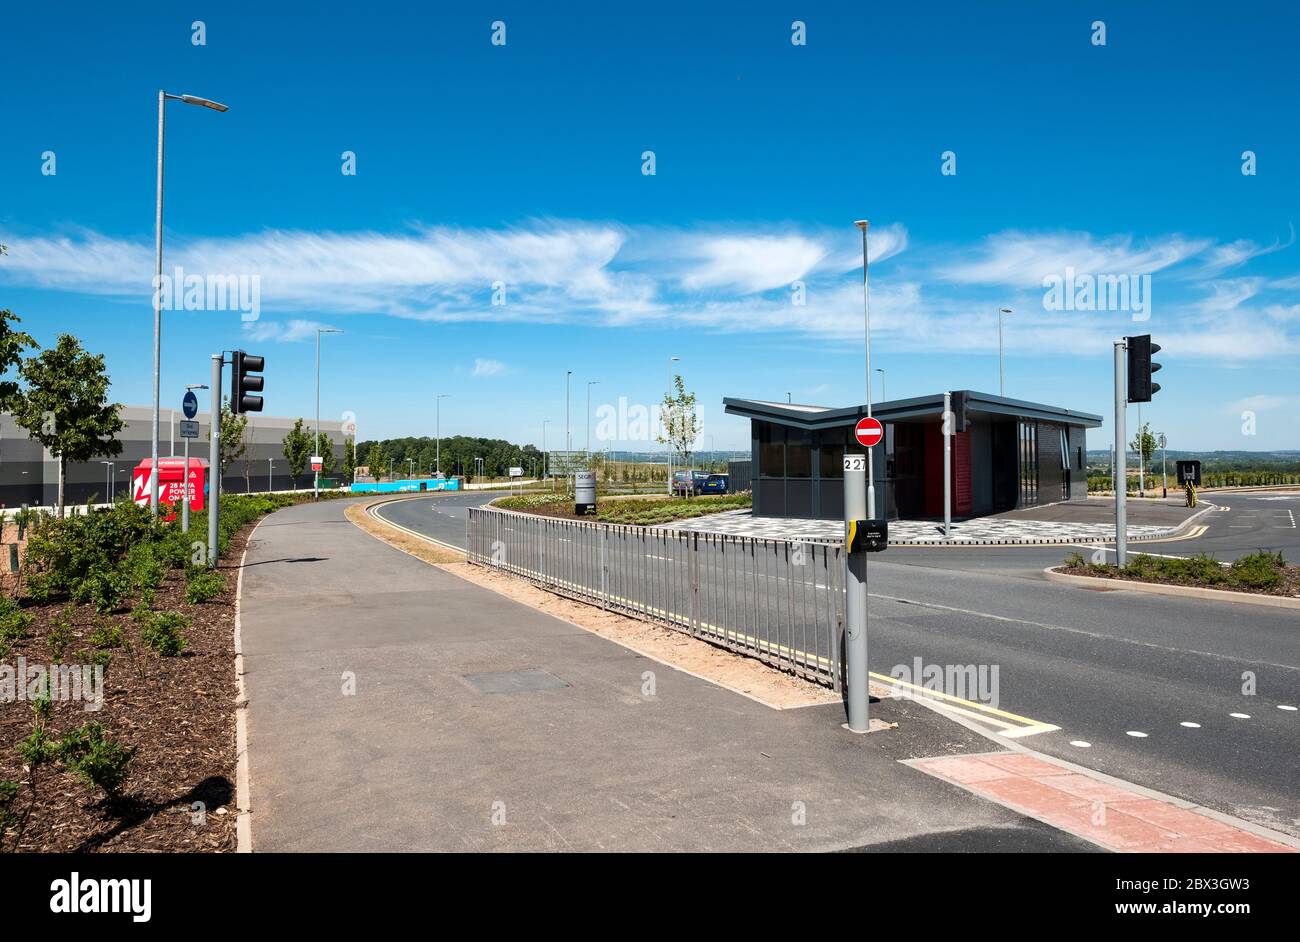 New road layout at a business park Stock Photo